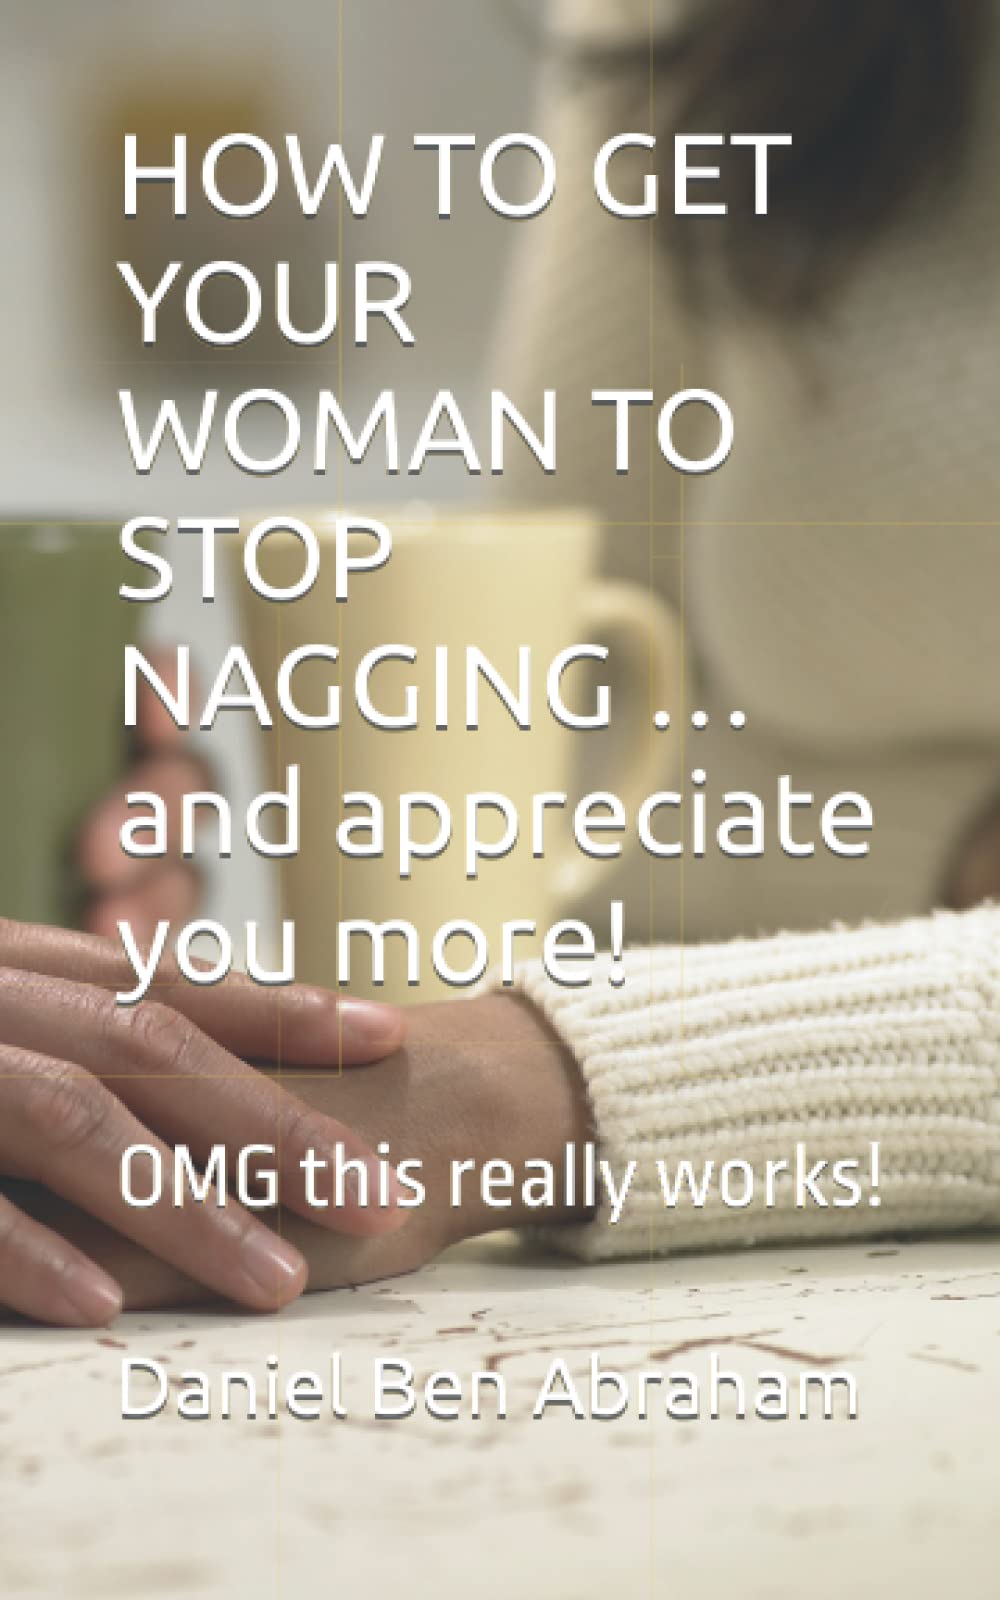 How to get your woman to stop nagging